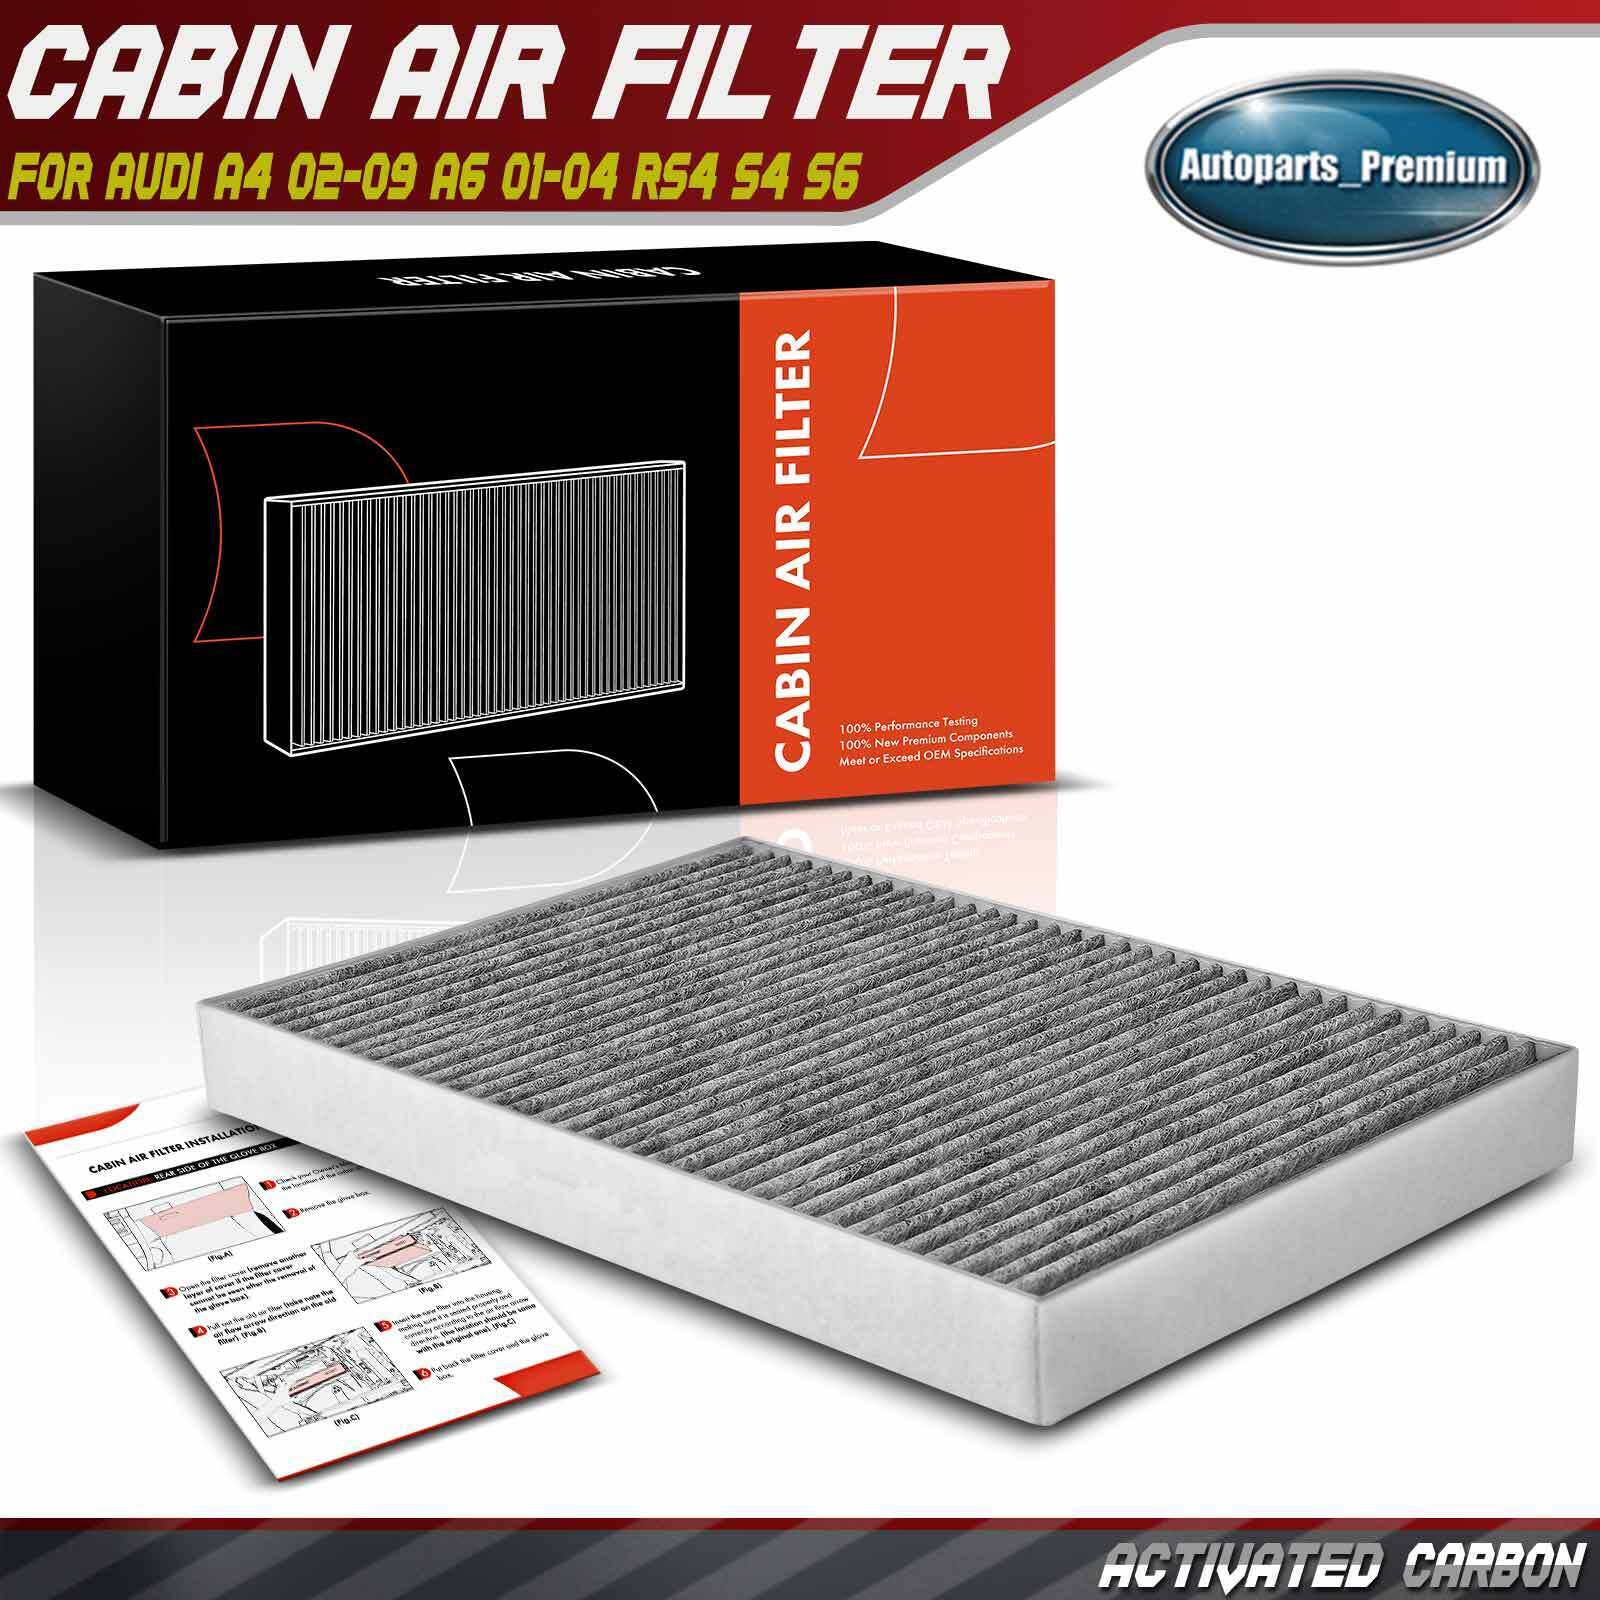 Activated Carbon Cabin Air Filter for Audi A4 2002 -2009 A6 Allroad Quattro S4